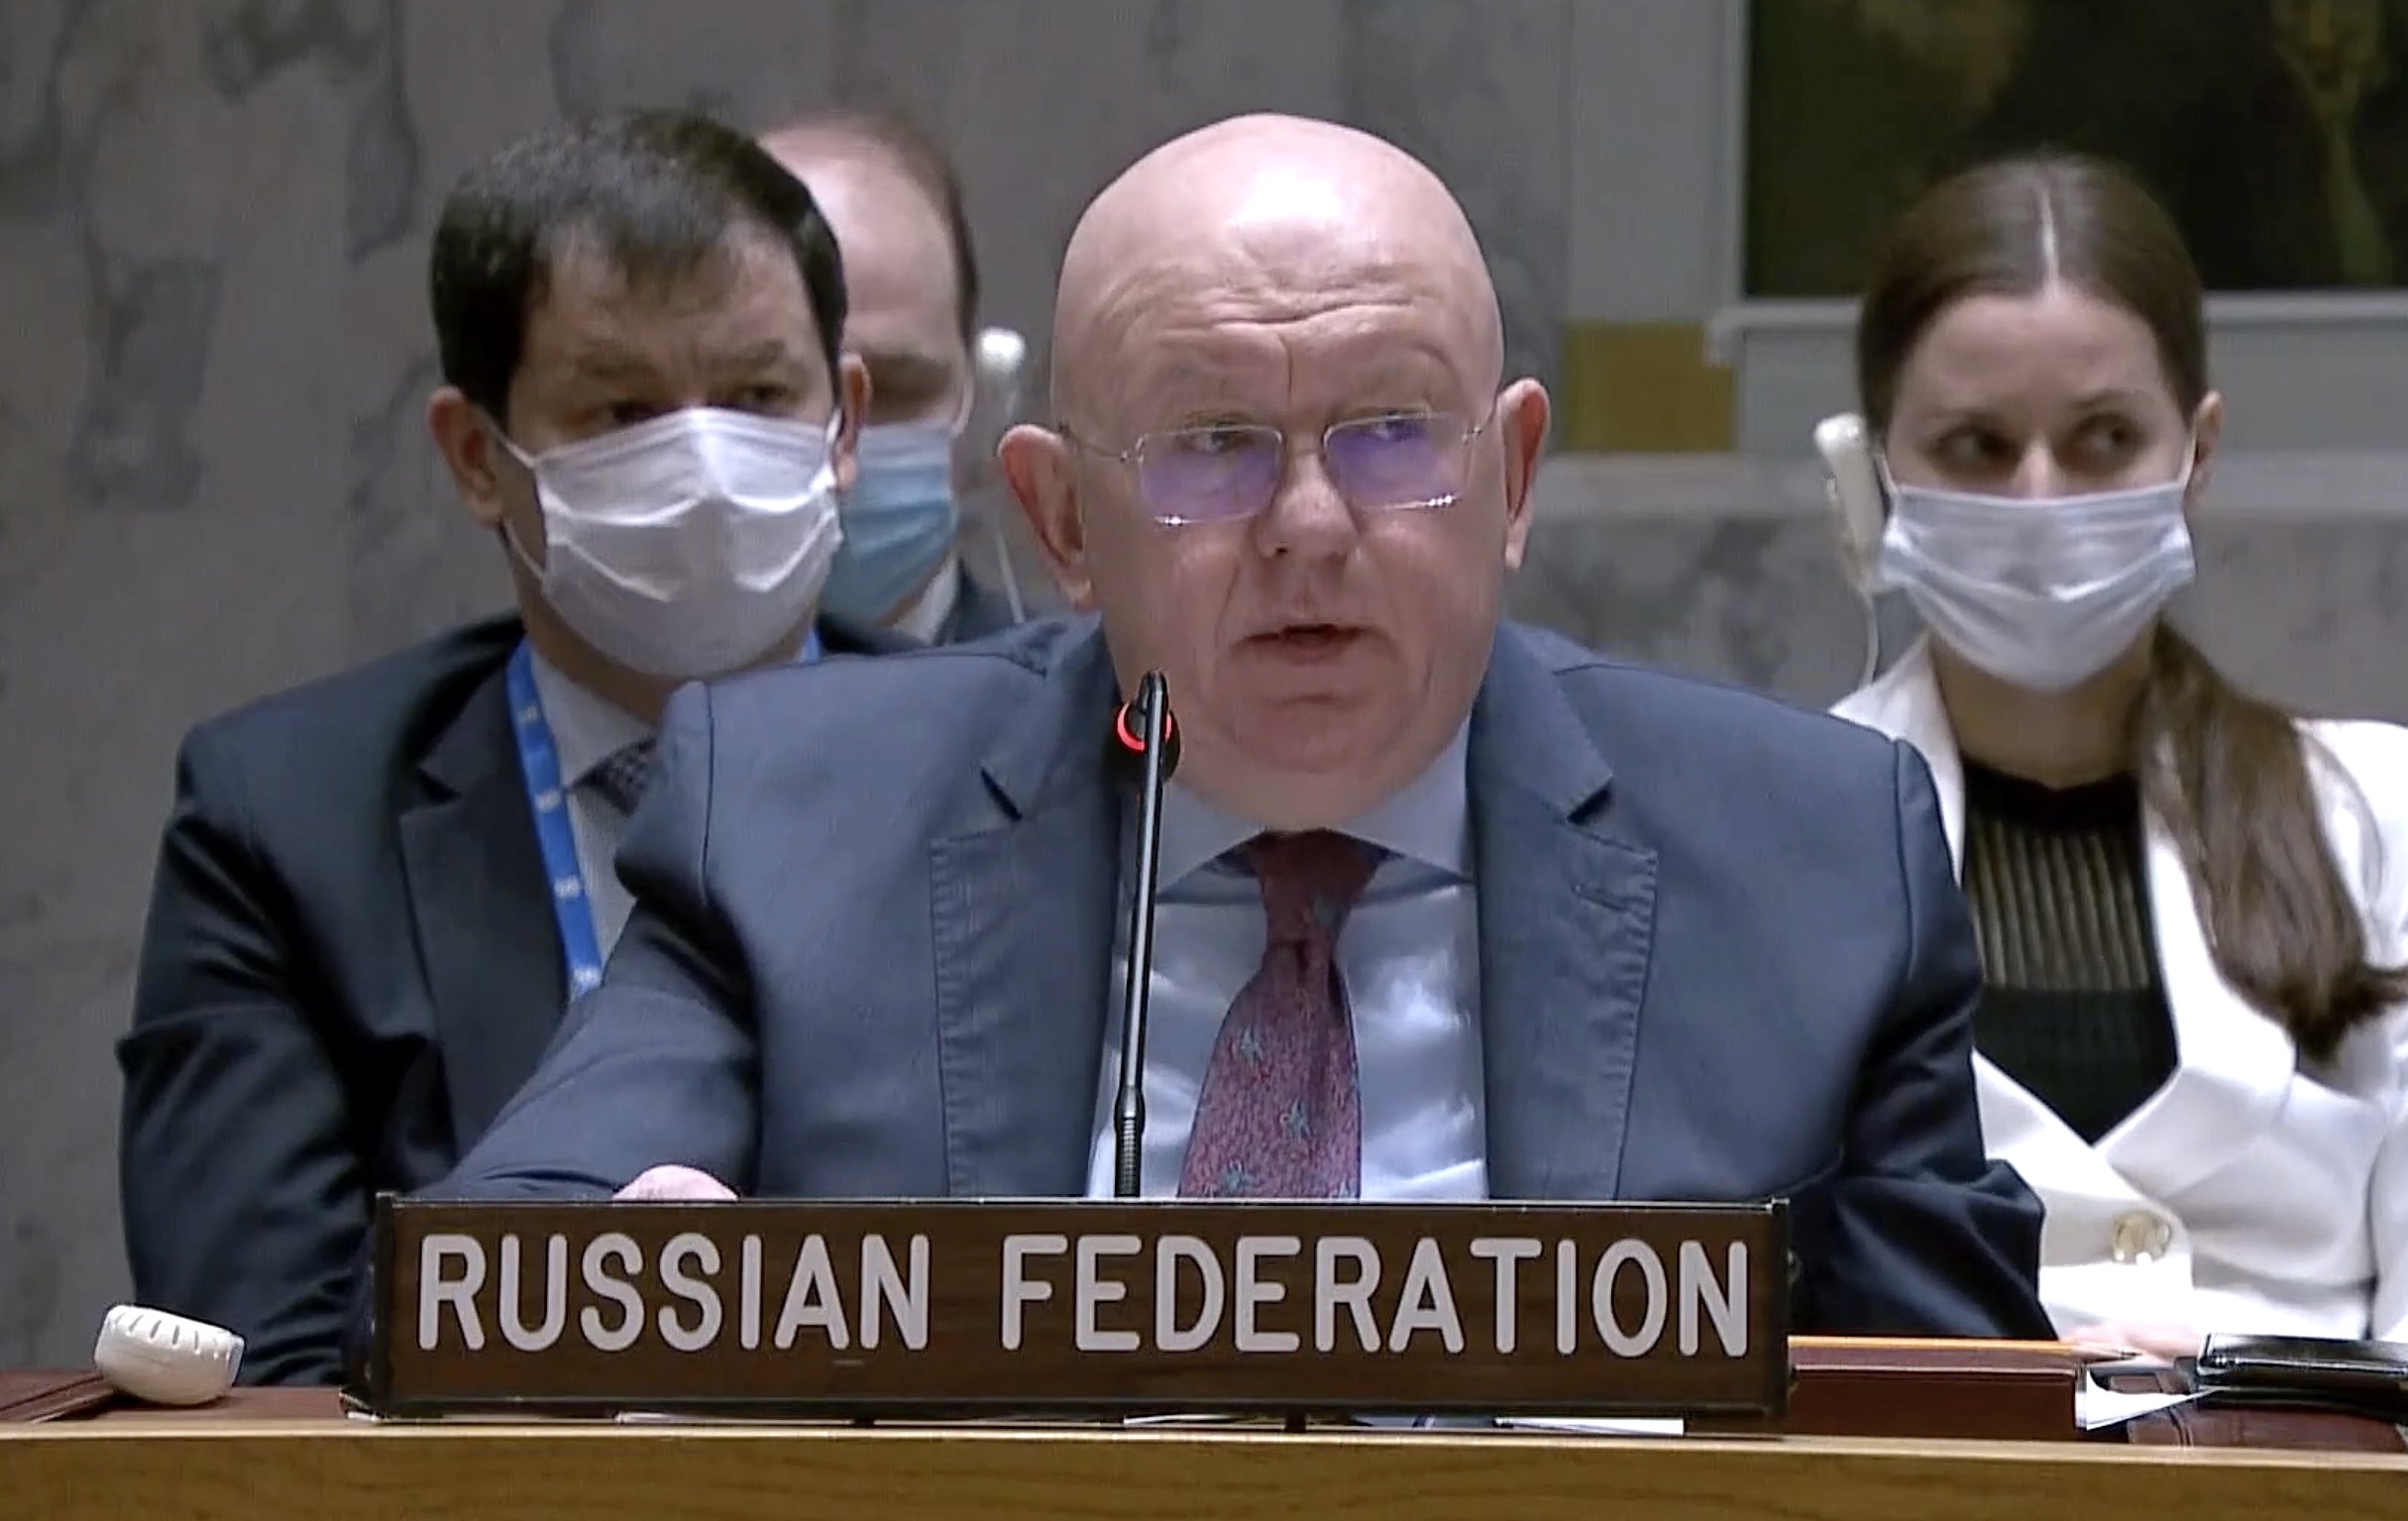 Russian Ambassador to the United Nations Vasily Nebenzya speaks during a Security Council meeting, Friday, March 11, 2022, at UN headquarters. The Russian request for the Security Council meeting followed a U.S. rejection of Russian accusations that Ukraine is operating chemical and biological labs with U.S. support. (UNTV via AP)